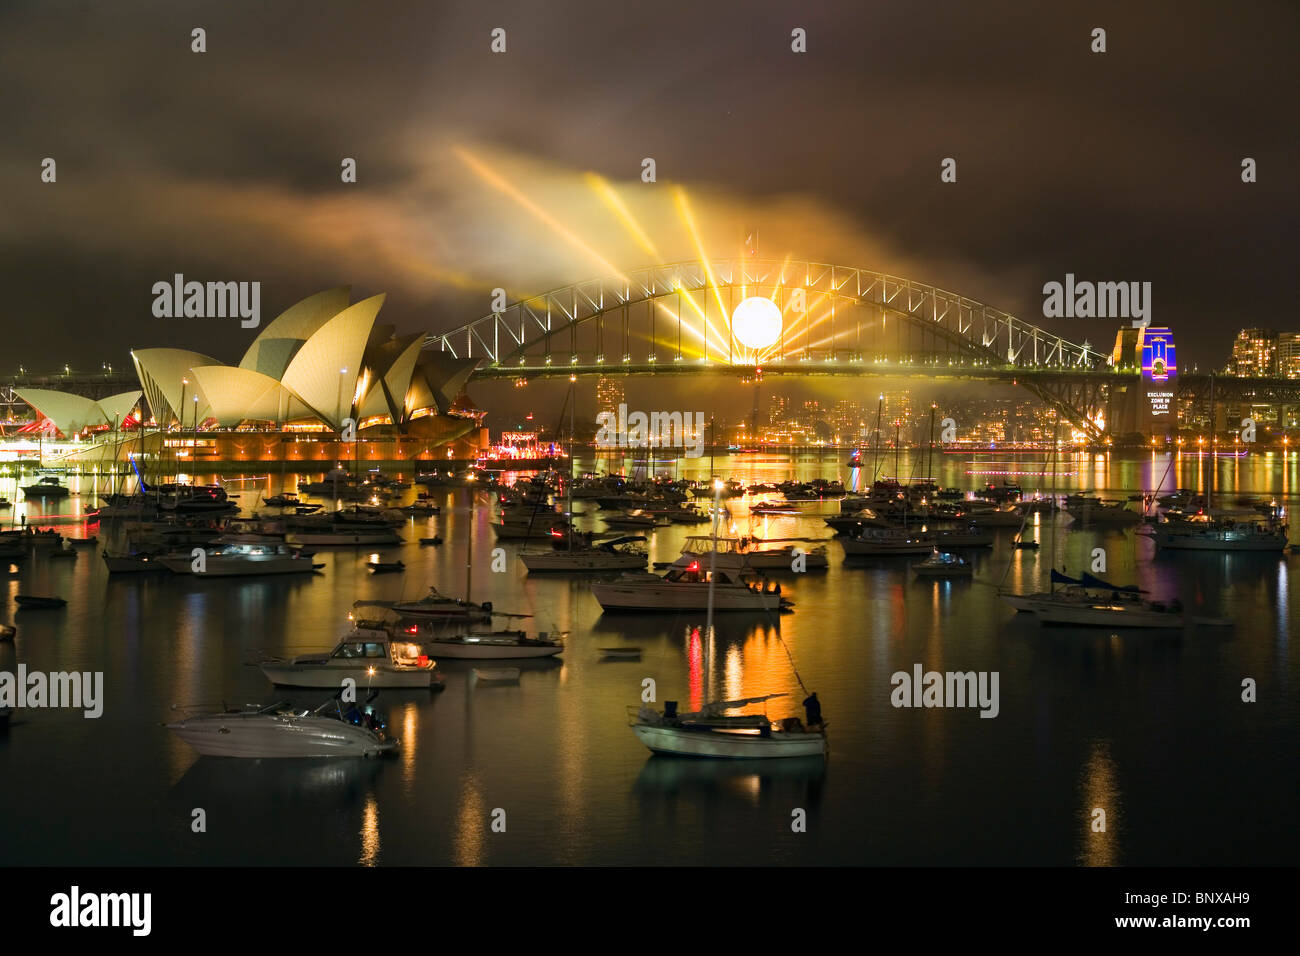 The Opera House and Harbour Bridge lit up for New Year's Eve celebrations. Sydney, New South Wales, AUSTRALIA Stock Photo